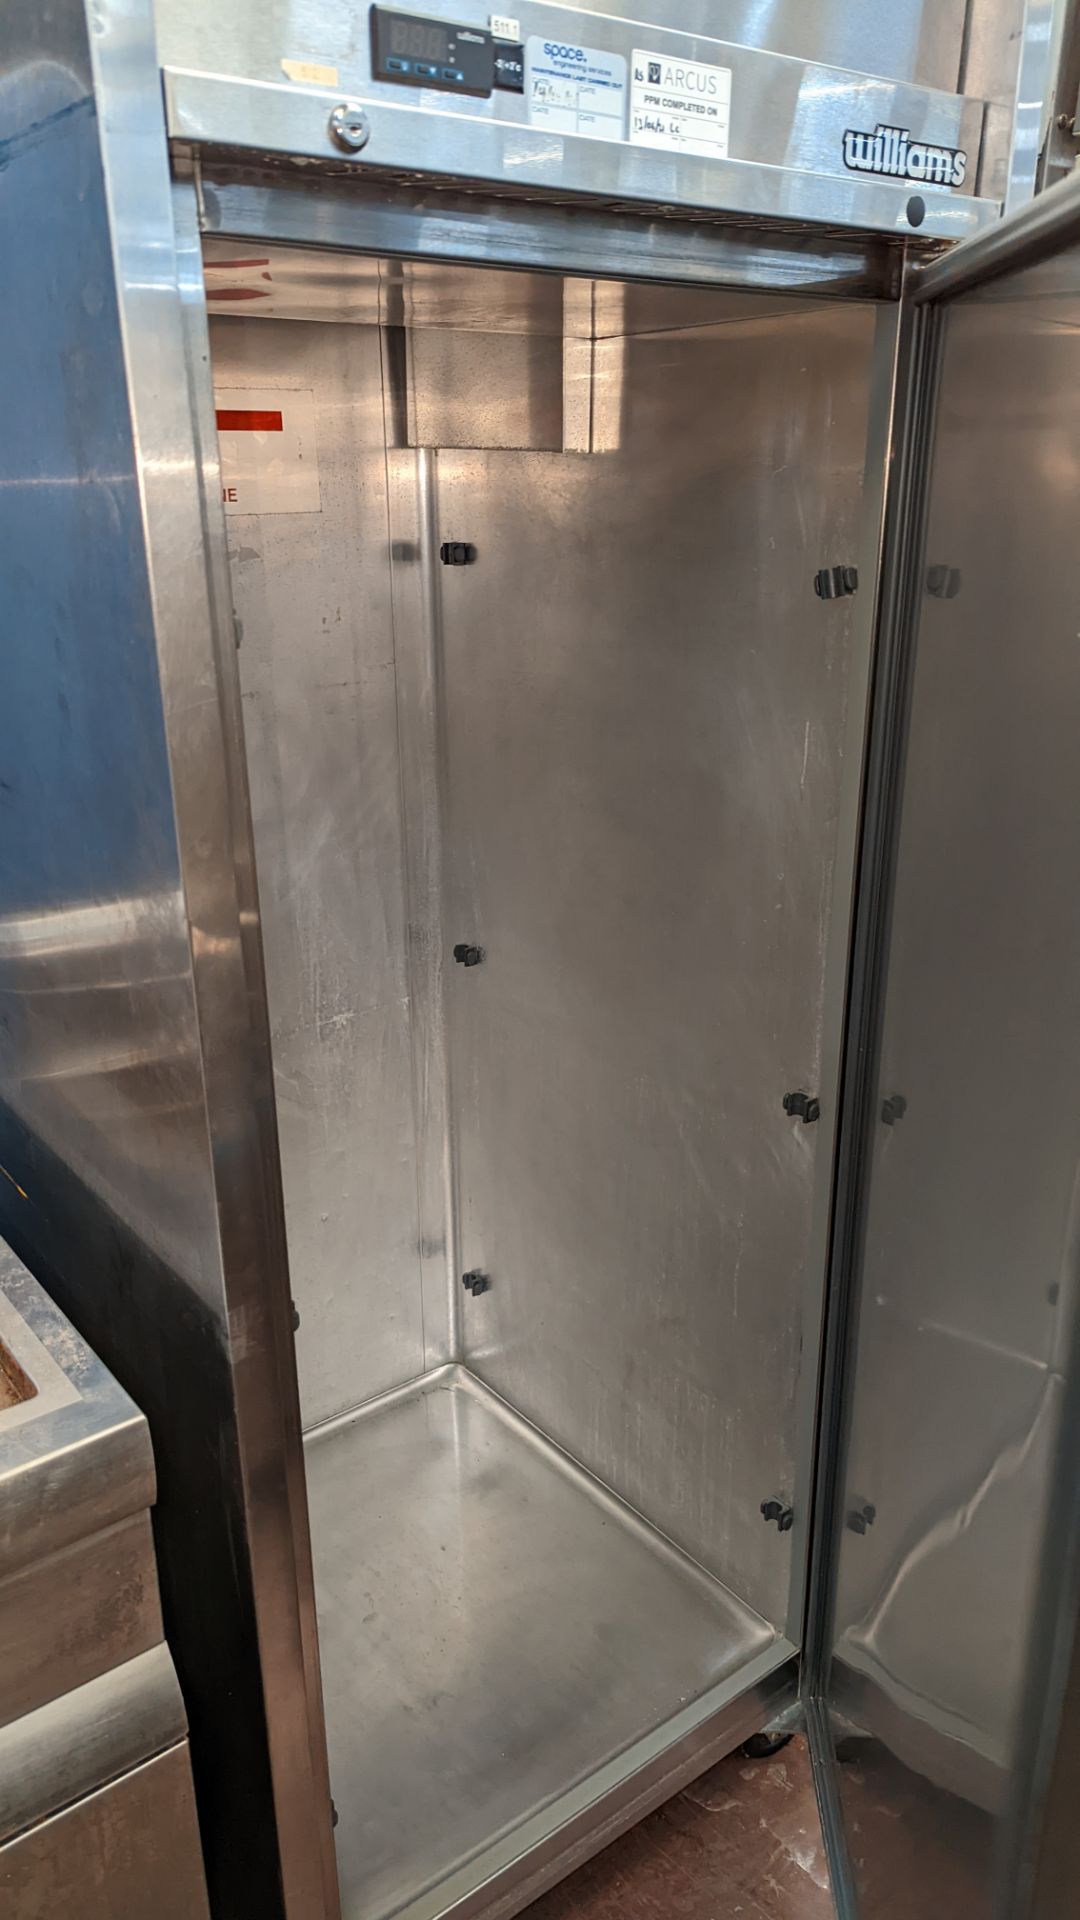 Williams stainless steel commercial fridge - Image 3 of 6